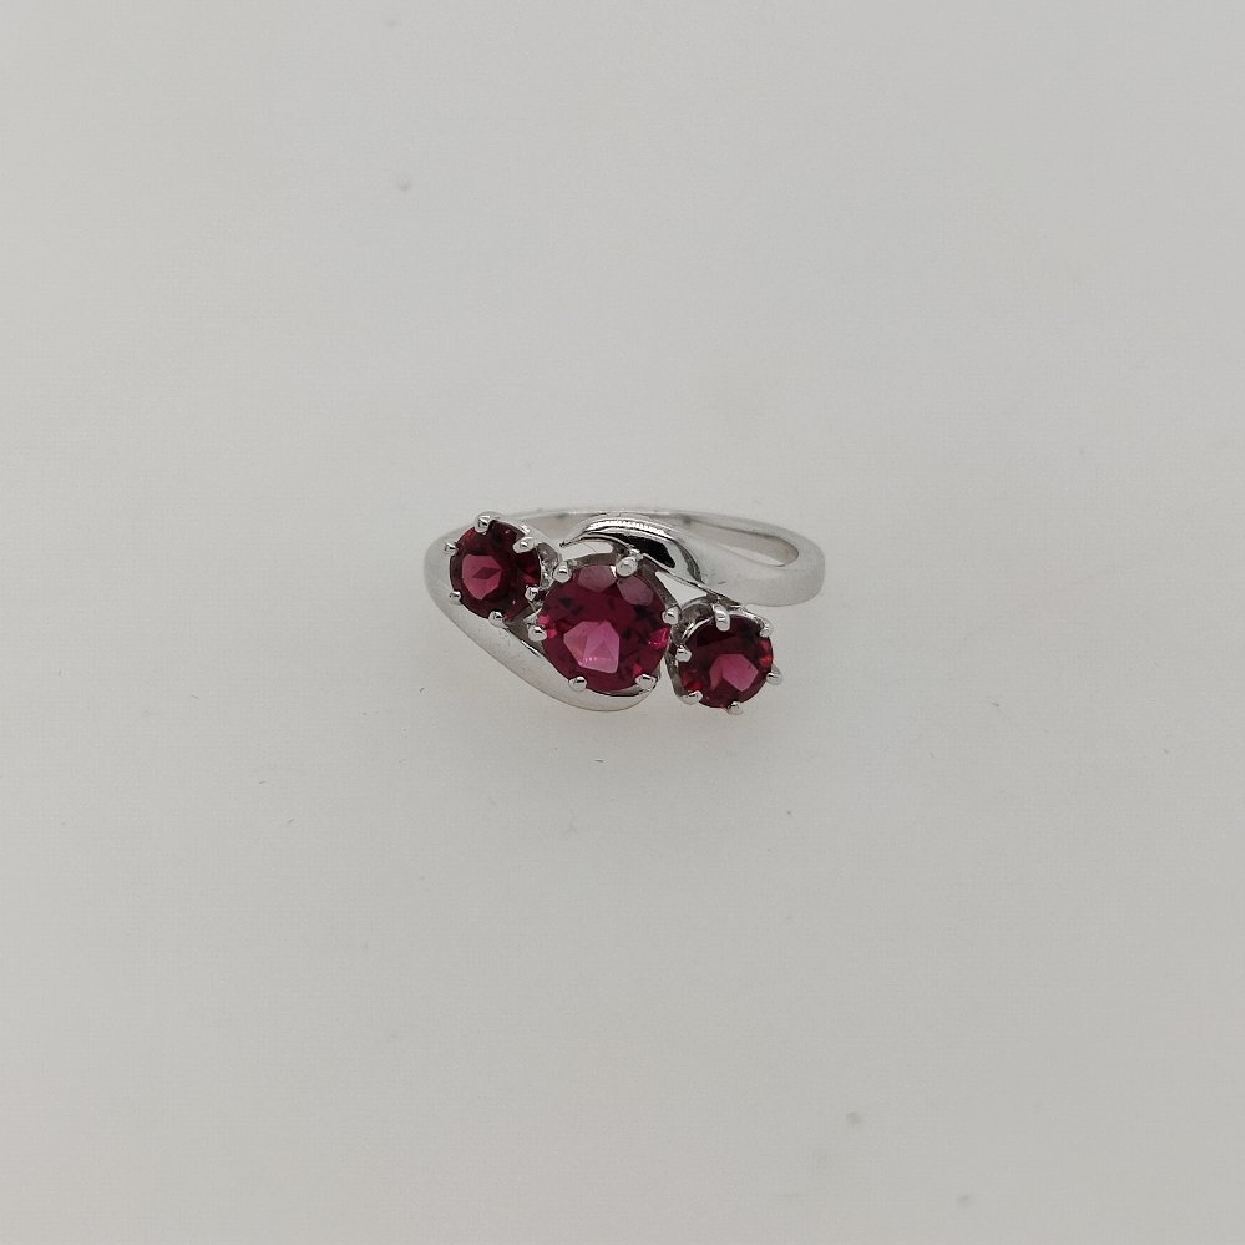 14K White Gold Bypass Style Ring with 3 Rhodolite Garnets; Size 6.75 